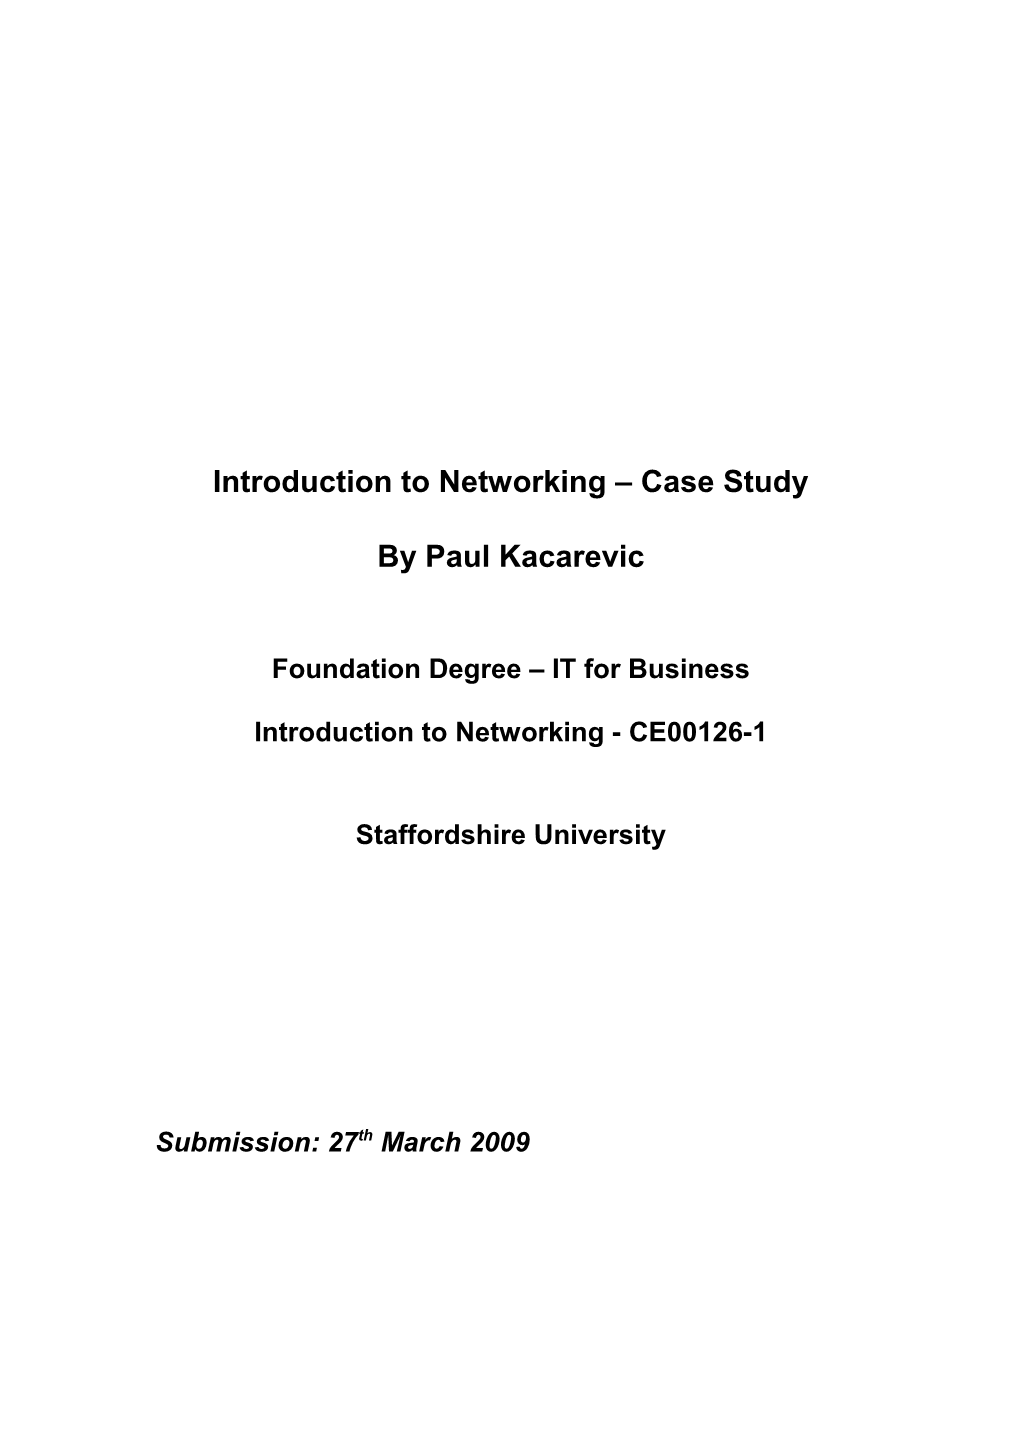 Introduction to Networking Case Study